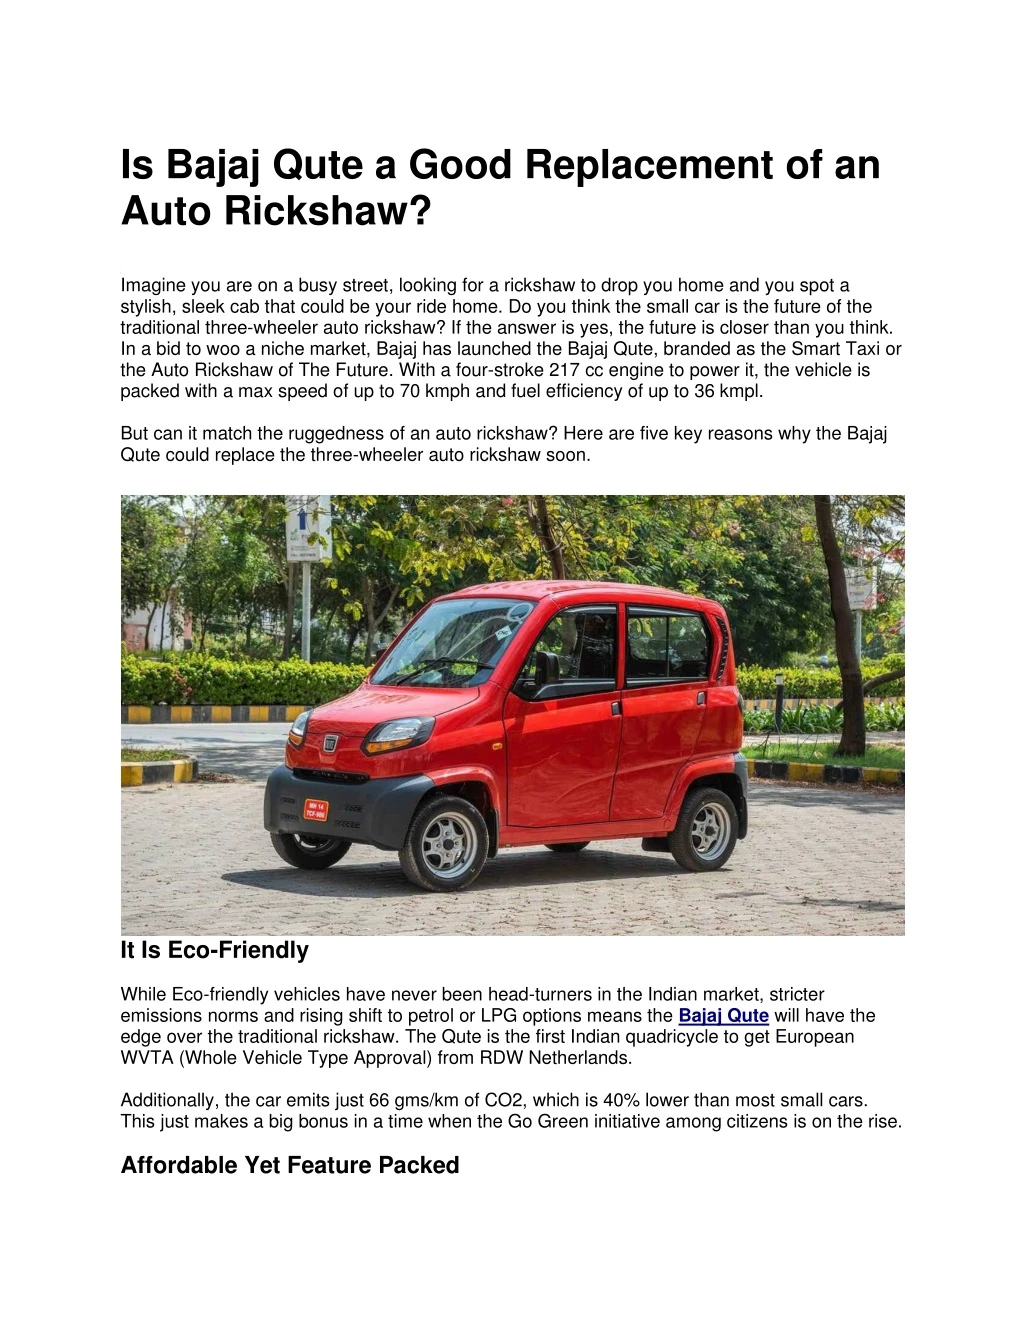 is bajaj qute a good replacement of an auto